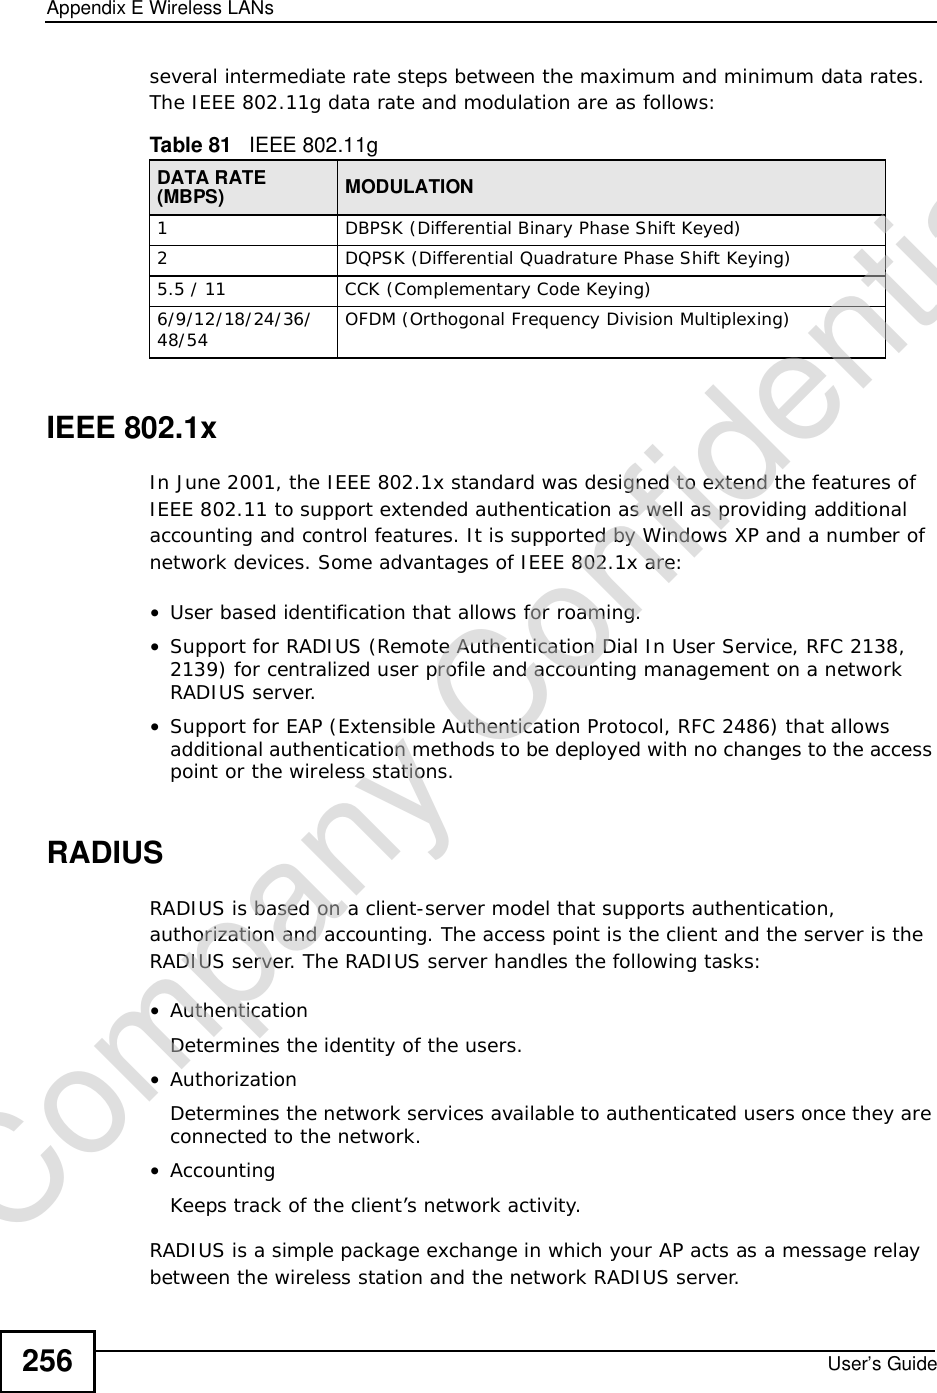 Appendix EWireless LANsUser’s Guide256several intermediate rate steps between the maximum and minimum data rates. The IEEE 802.11g data rate and modulation are as follows:IEEE 802.1xIn June 2001, the IEEE 802.1x standard was designed to extend the features of IEEE 802.11 to support extended authentication as well as providing additional accounting and control features. It is supported by Windows XP and a number of network devices. Some advantages of IEEE 802.1x are:•User based identification that allows for roaming.•Support for RADIUS (Remote Authentication Dial In User Service, RFC 2138, 2139) for centralized user profile and accounting management on a network RADIUS server. •Support for EAP (Extensible Authentication Protocol, RFC 2486) that allows additional authentication methods to be deployed with no changes to the access point or the wireless stations. RADIUSRADIUS is based on a client-server model that supports authentication, authorization and accounting. The access point is the client and the server is the RADIUS server. The RADIUS server handles the following tasks:•Authentication Determines the identity of the users.•AuthorizationDetermines the network services available to authenticated users once they are connected to the network.•AccountingKeeps track of the client’s network activity. RADIUS is a simple package exchange in which your AP acts as a message relay between the wireless station and the network RADIUS server. Table 81   IEEE 802.11gDATA RATE (MBPS) MODULATION1DBPSK (Differential Binary Phase Shift Keyed)2DQPSK (Differential Quadrature Phase Shift Keying)5.5 / 11CCK (Complementary Code Keying) 6/9/12/18/24/36/48/54 OFDM (Orthogonal Frequency Division Multiplexing) Company Confidential